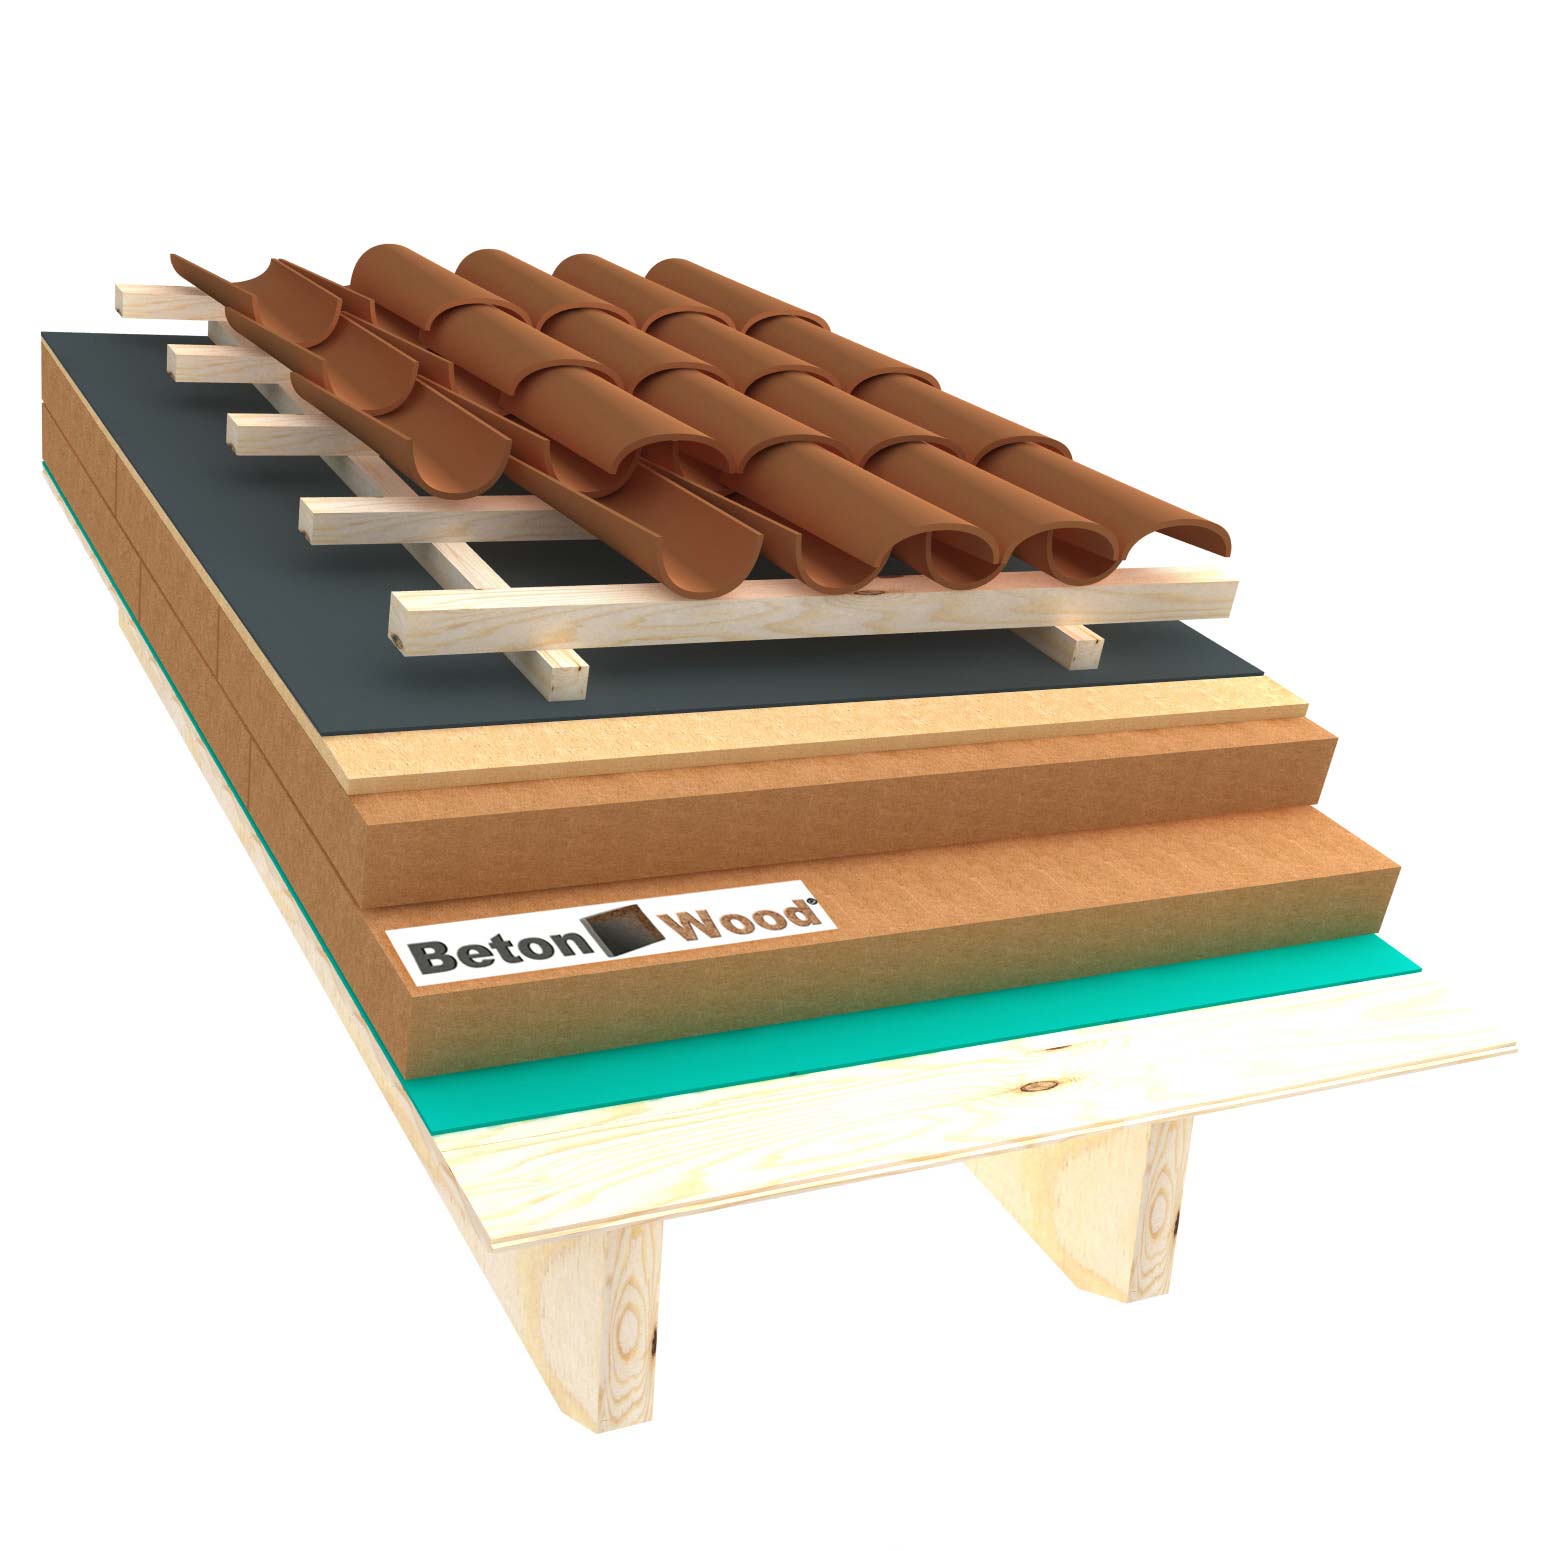 Ventilated roof with fiber wood Isorel and Universal on matchboarding